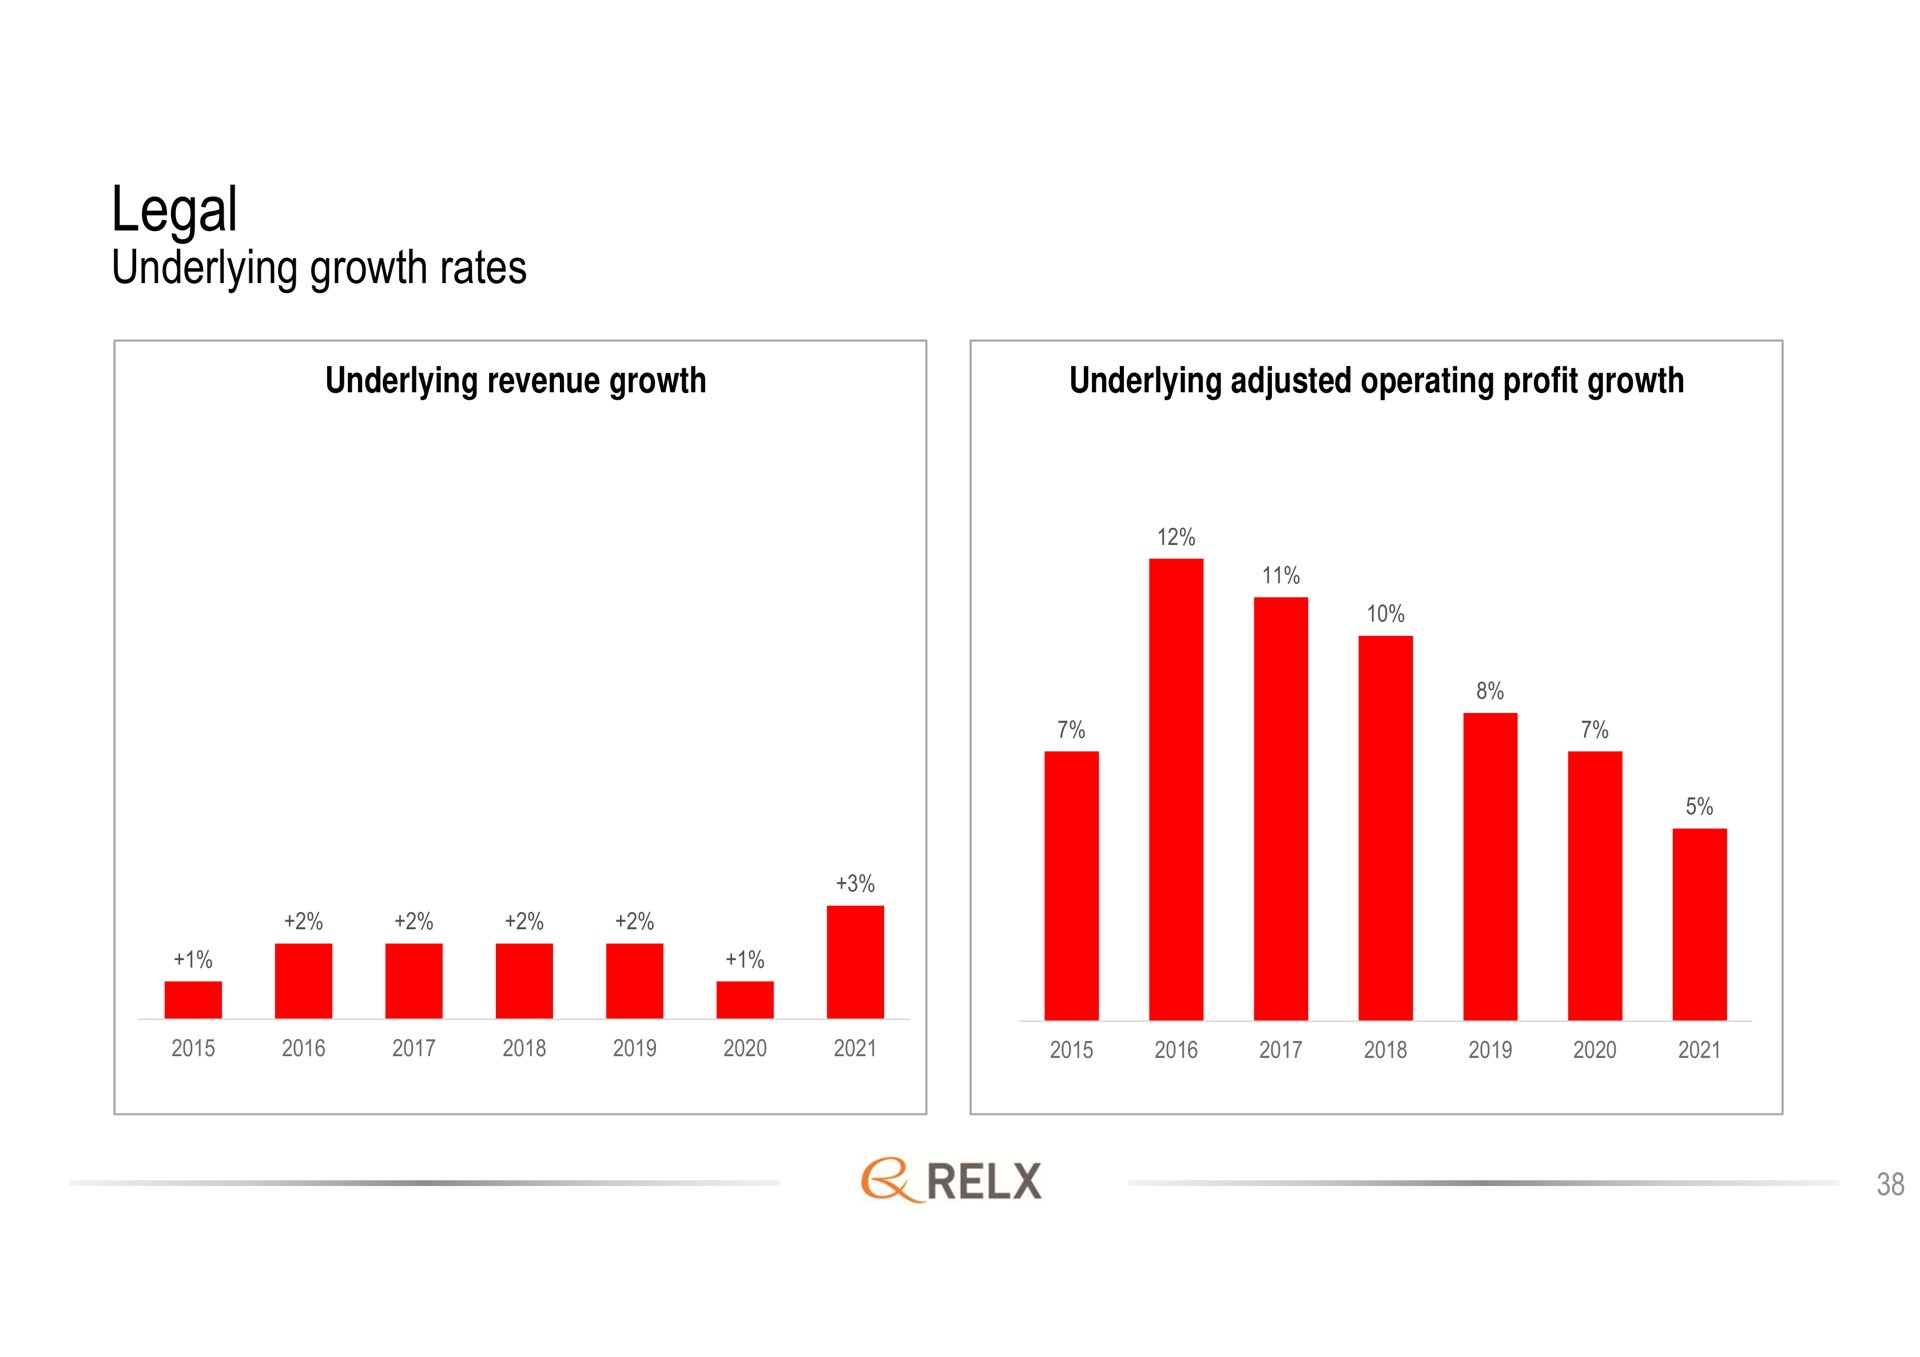 legal underlying growth rates | RELX